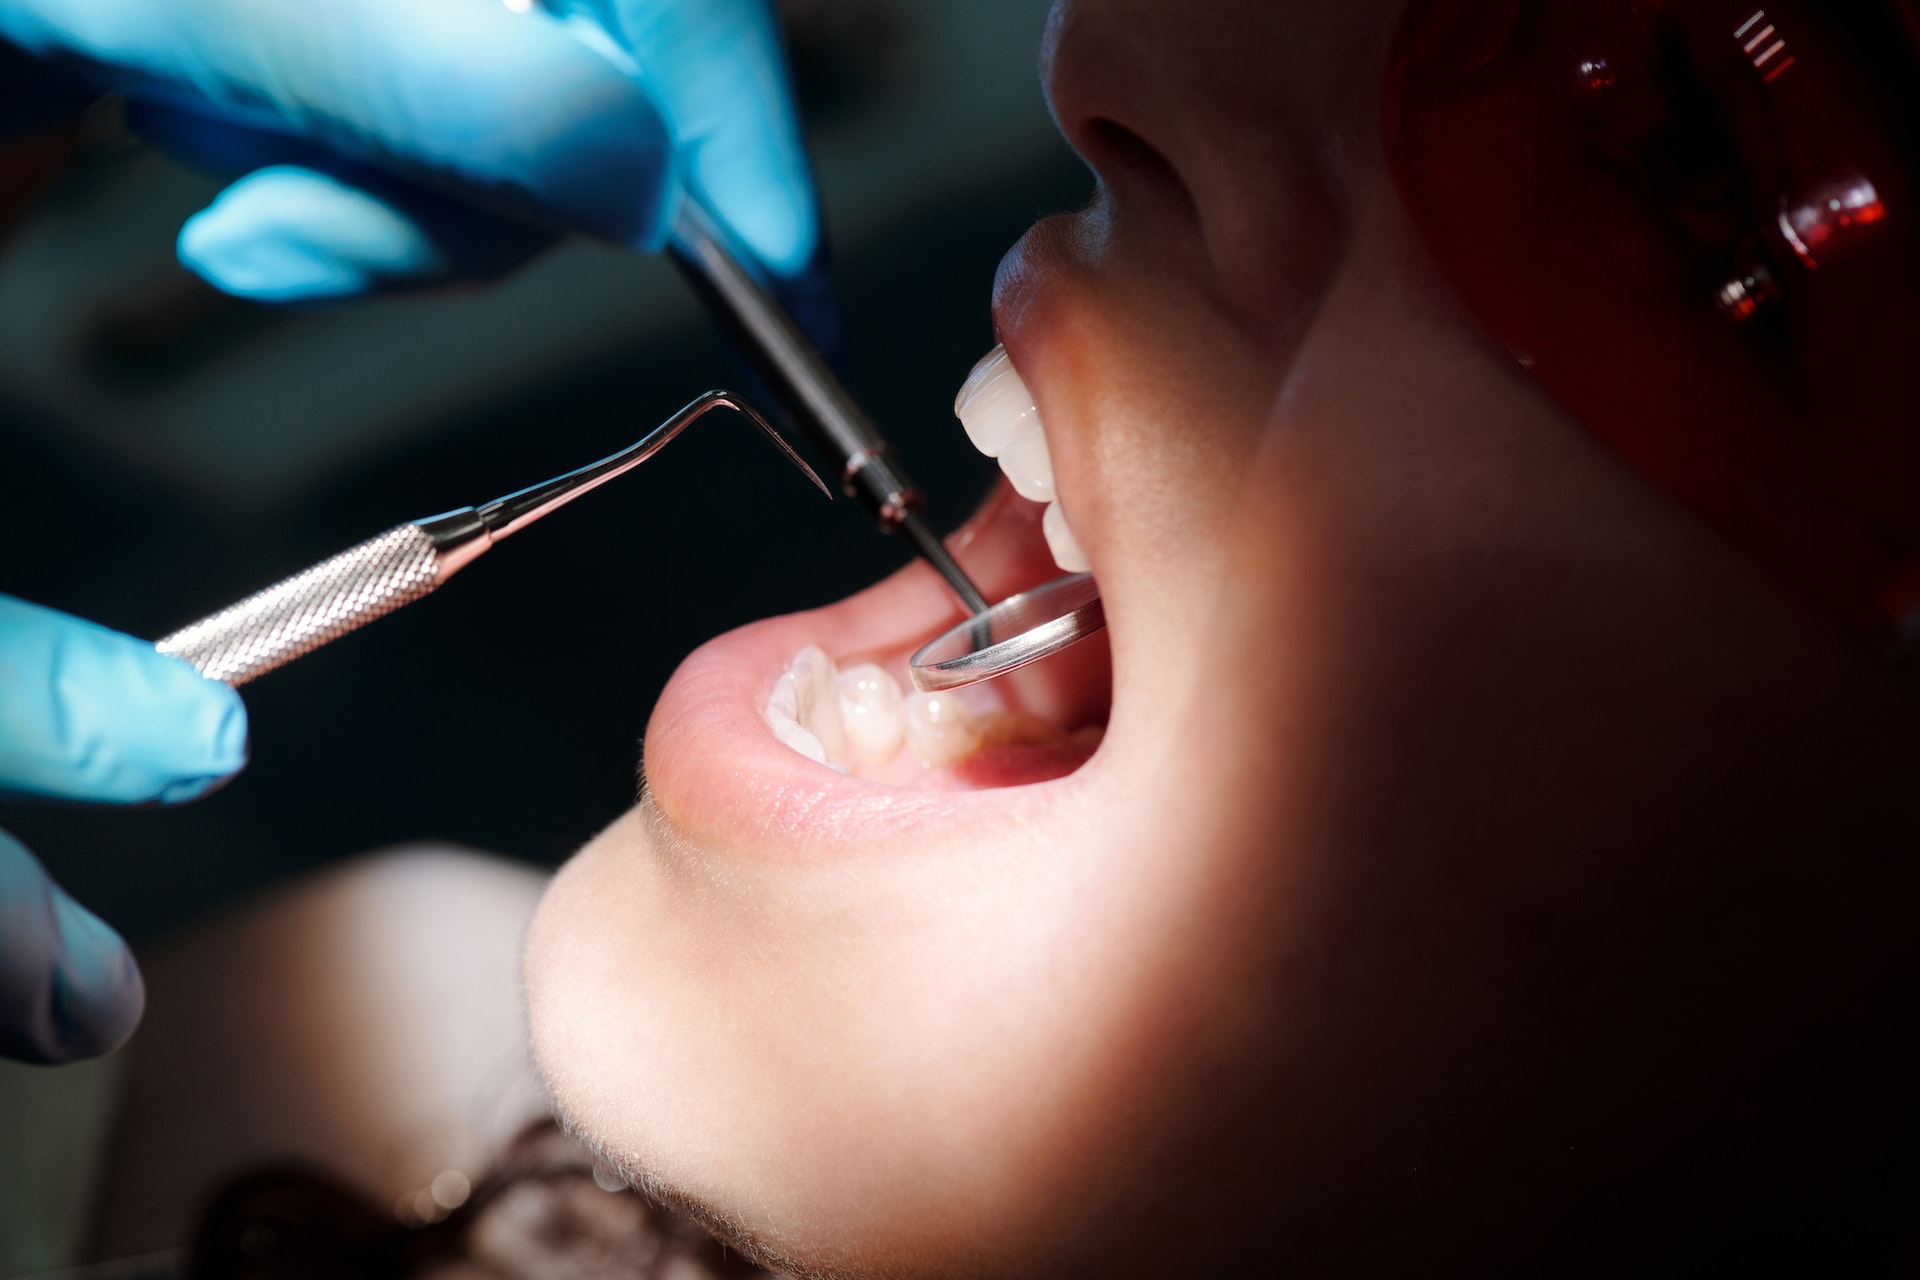 In addition to preventive care, dentists are skilled in performing